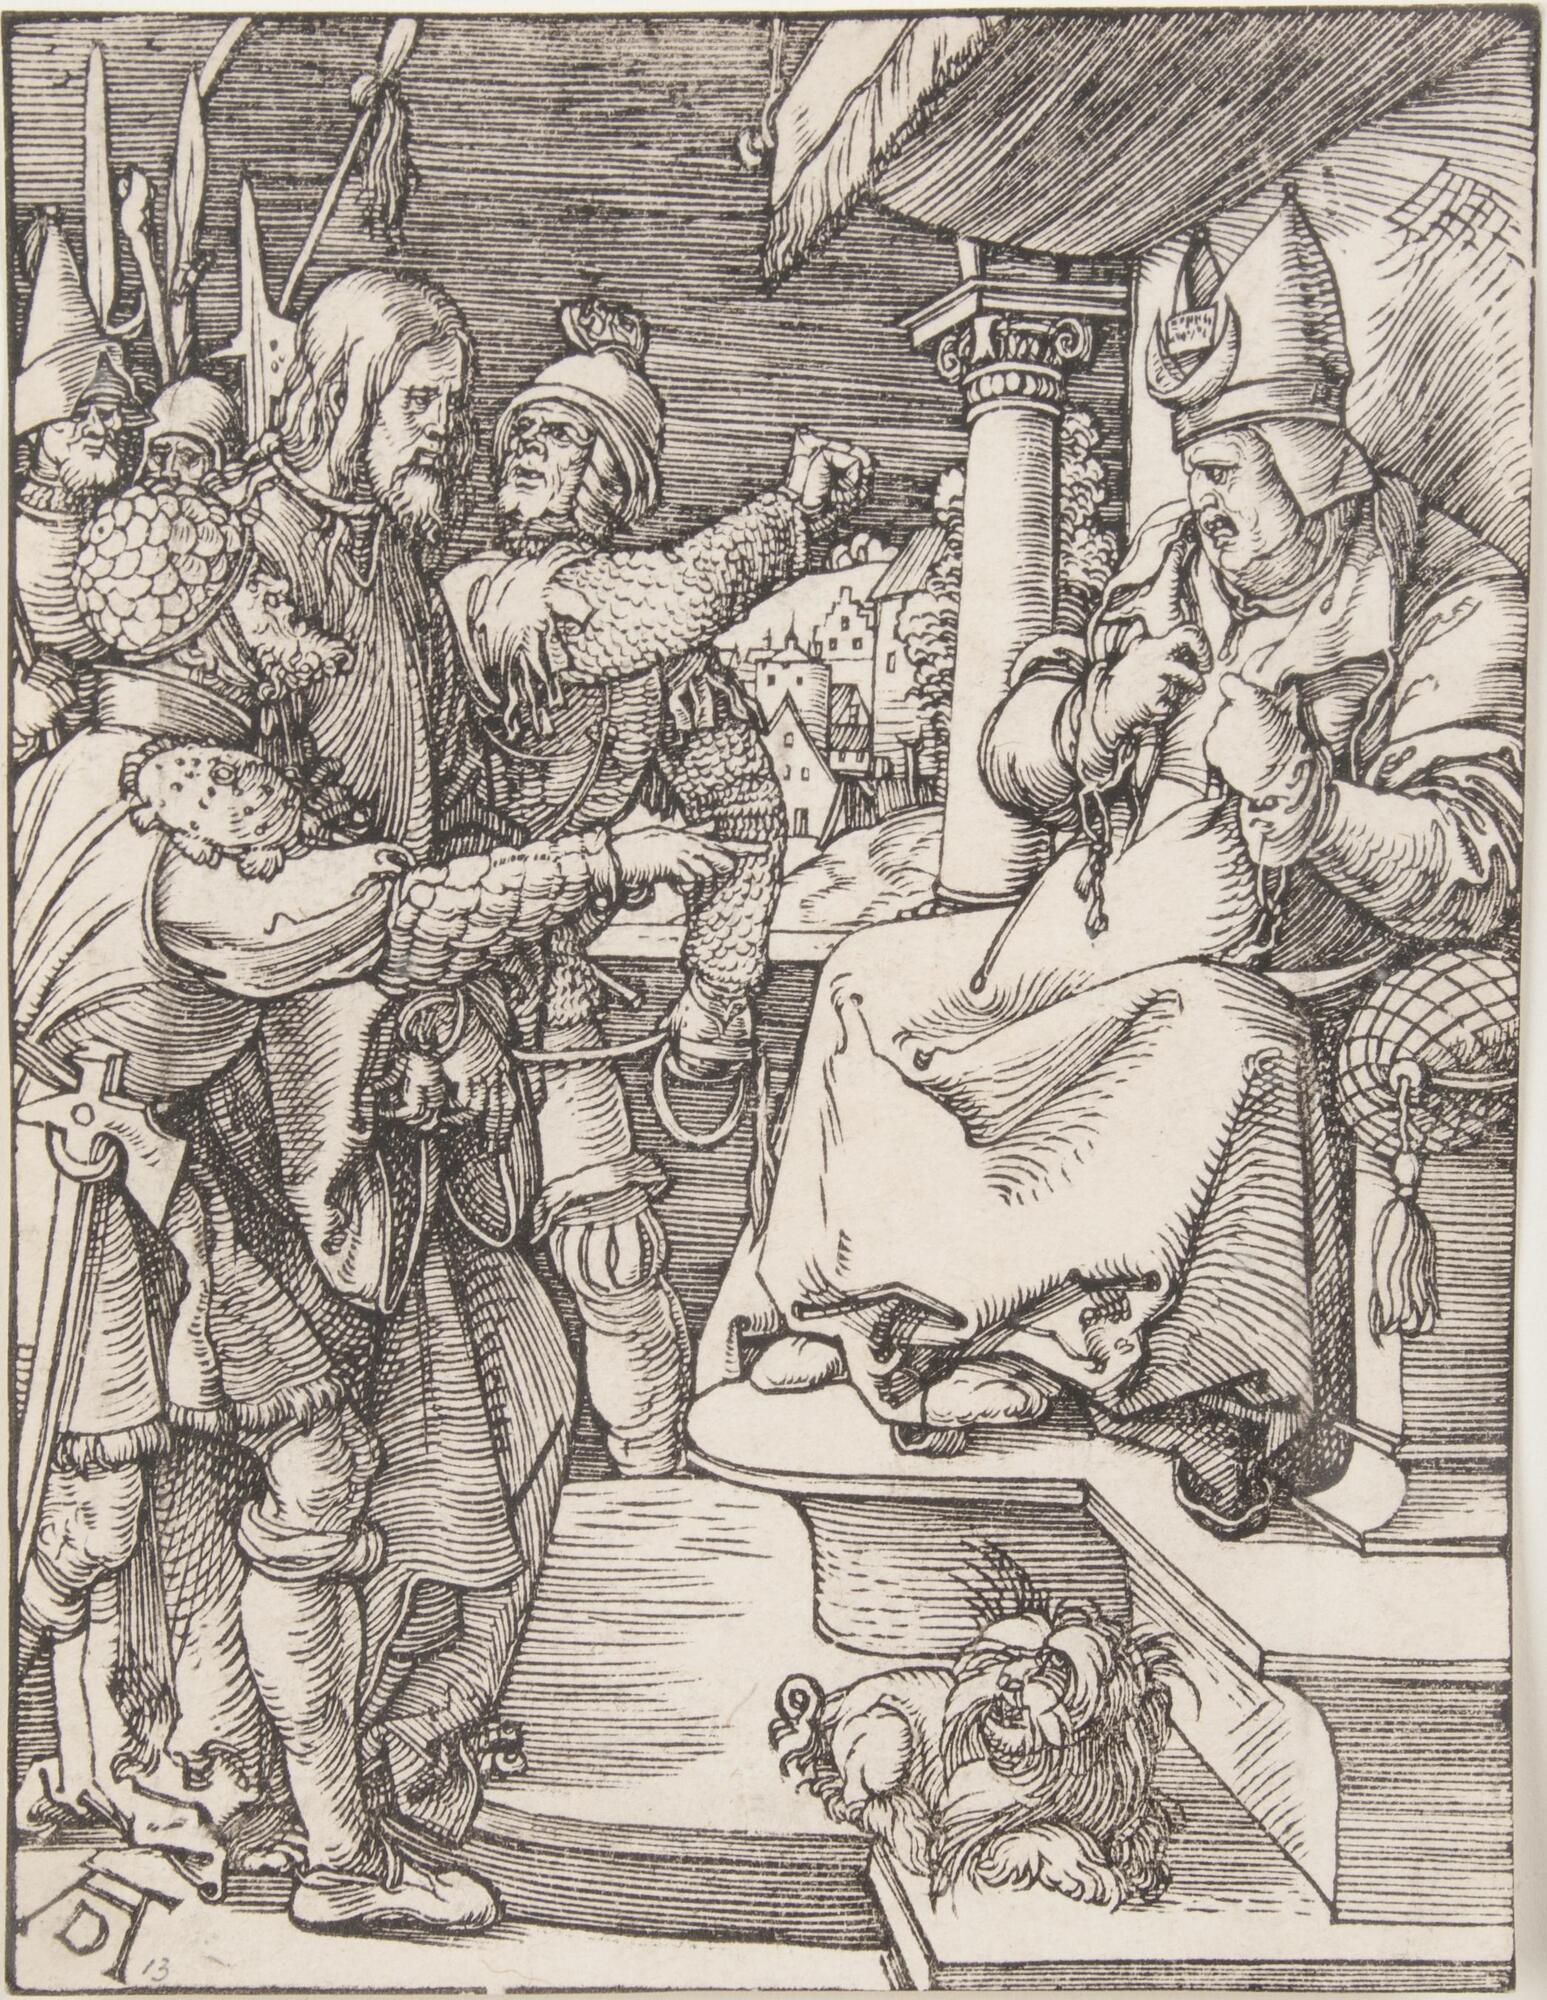 A man seated on a throne under a canopy on the right looks toward a group of standing figures on the left. A group of soldiers in helmets and armor and spears surround a tall bearded man who stands looking at the seated official. In the distance is a view of a town in a landscape and at the feet of the seated man is a dog.  The print is signed in the block "AD" on the lower left of the recto.